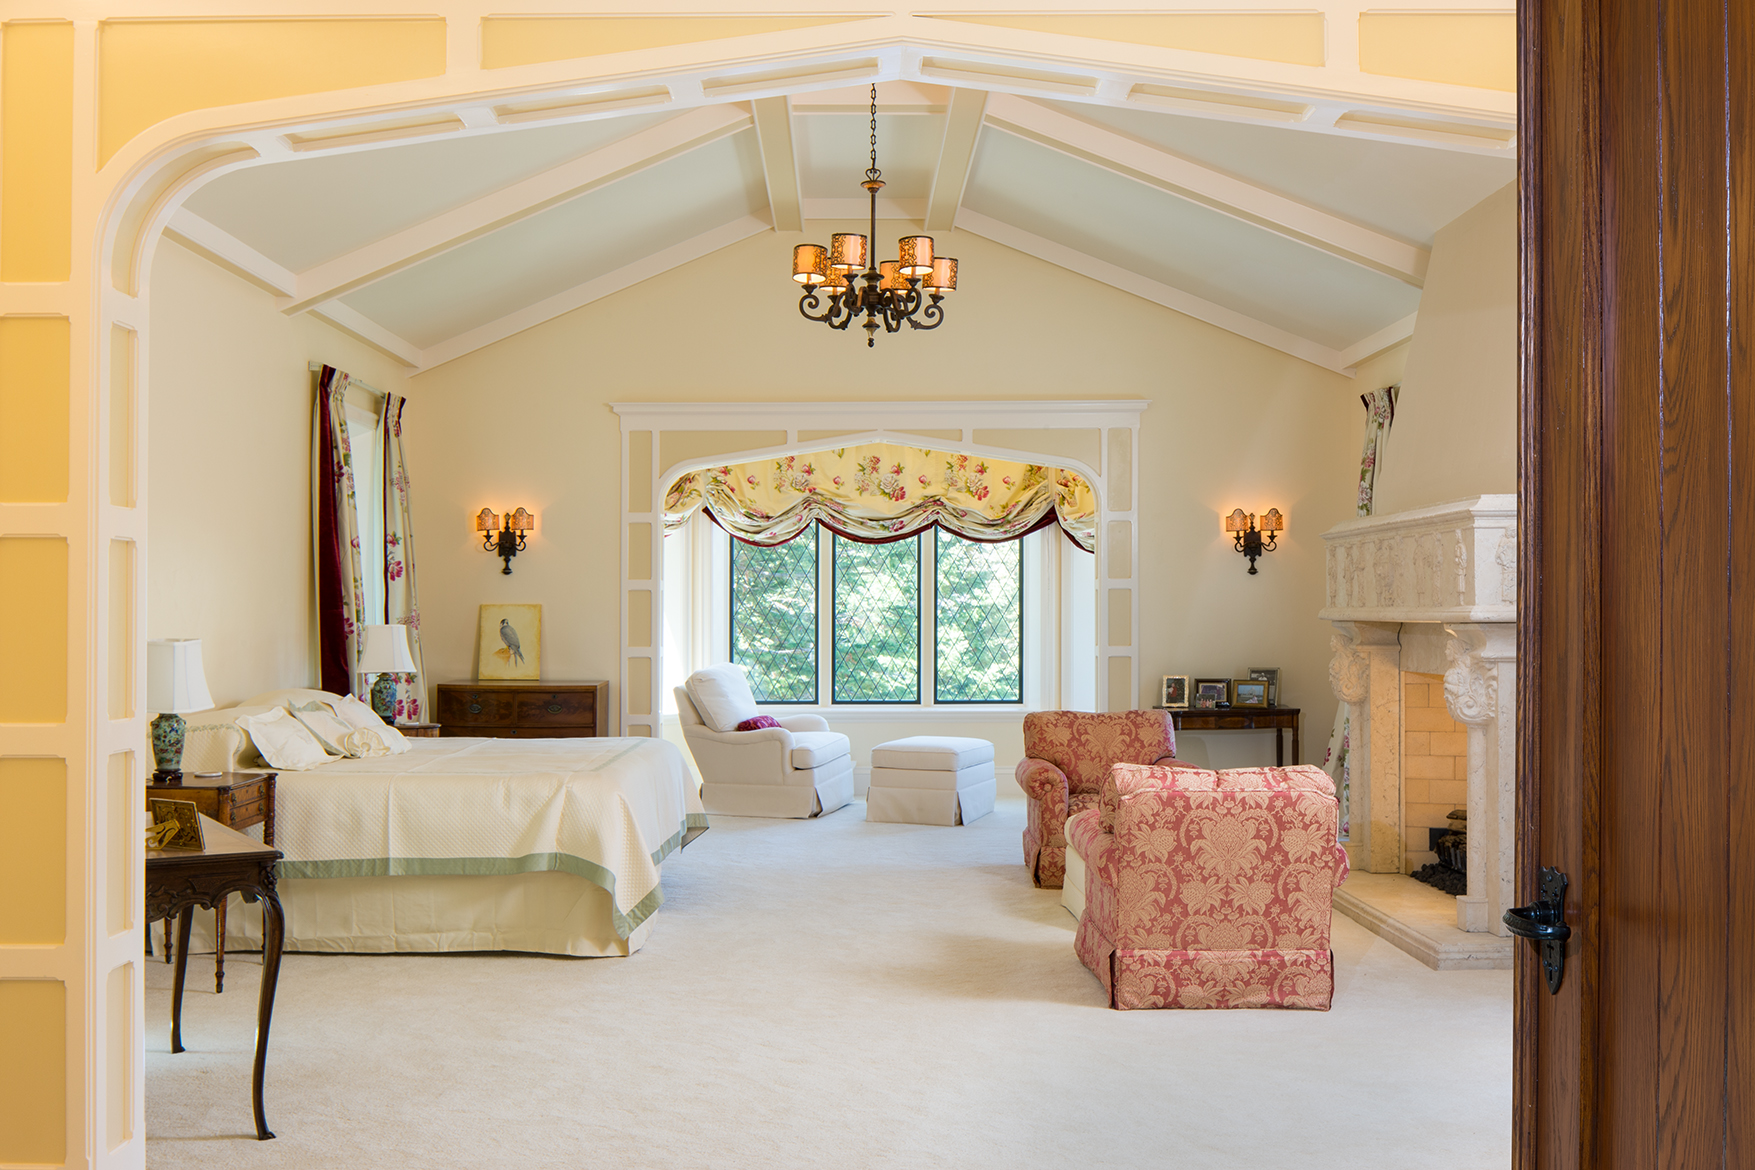 Master bedroom in a Scottish manor house with vaulted ceilings and a a large stone hearth and mantle.